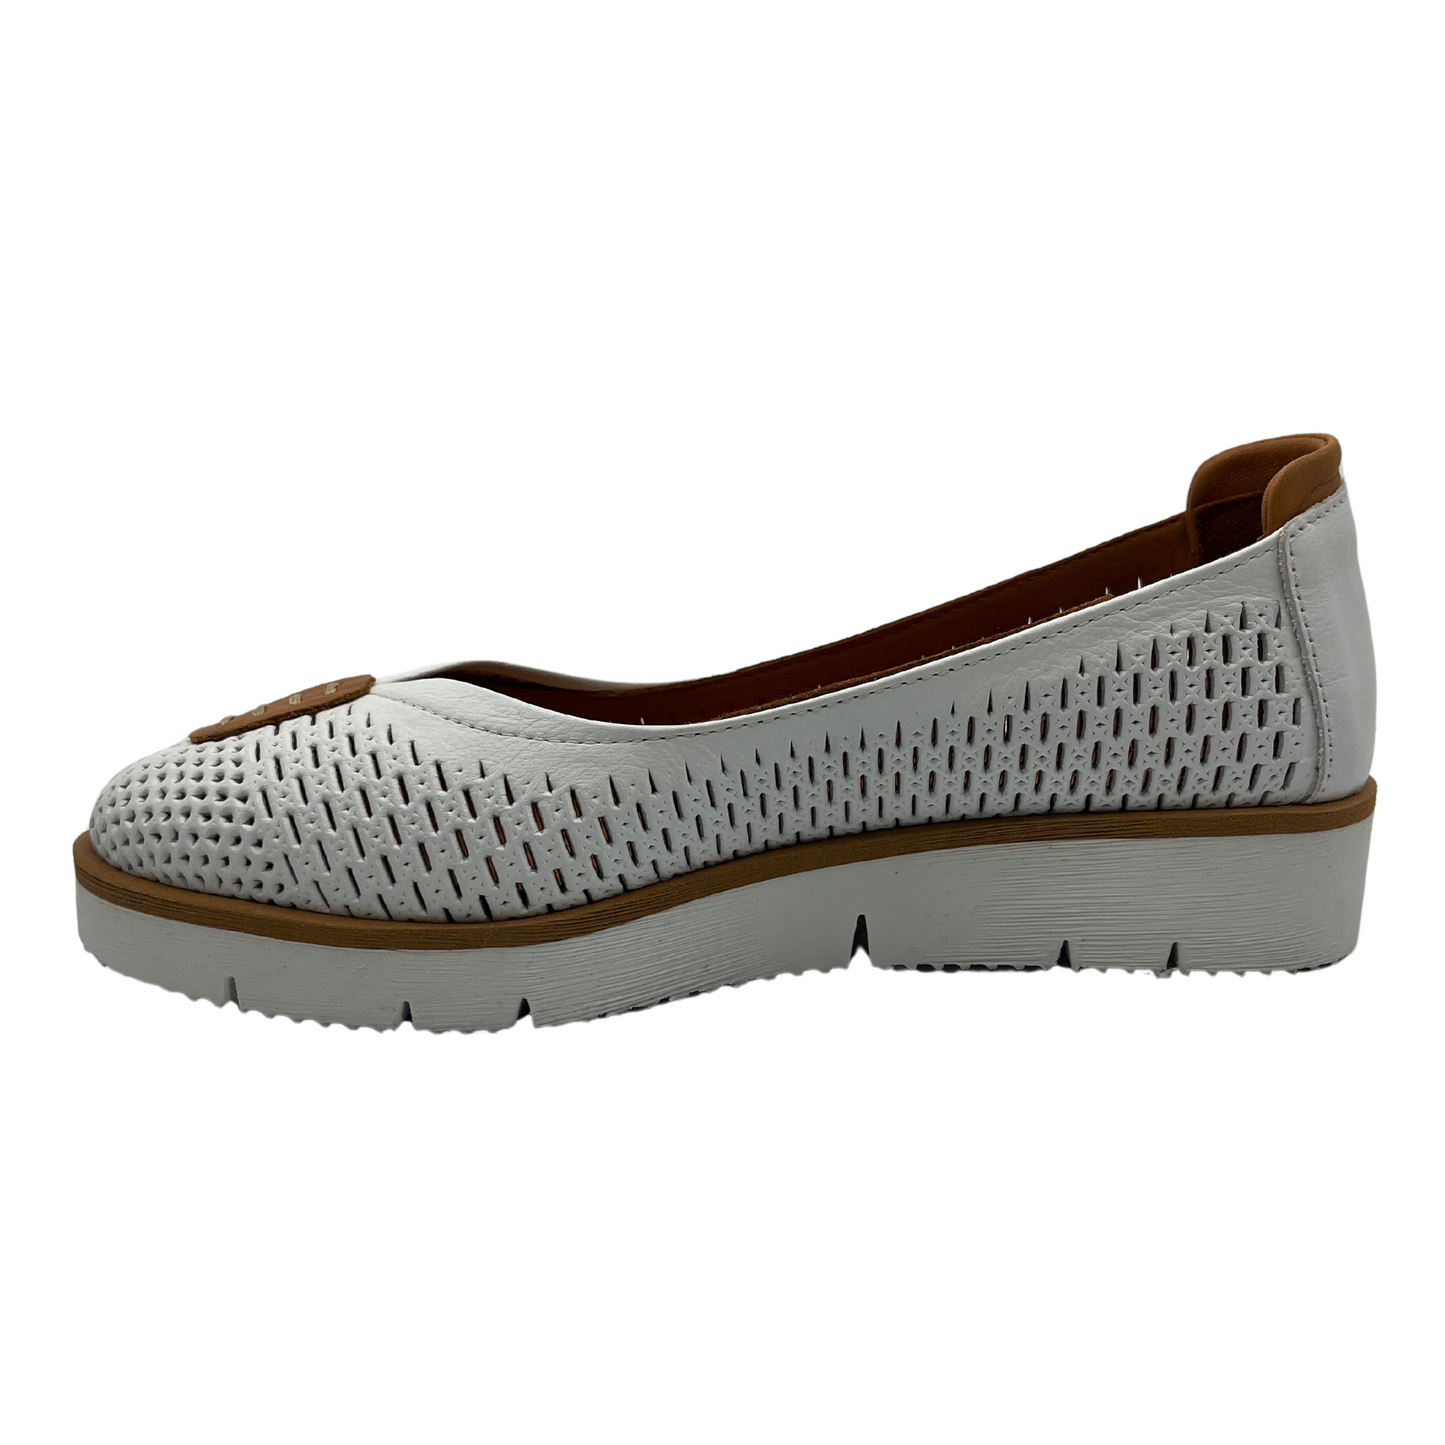 Left facing view of white perforated leather flat with thick outsole and leather lining